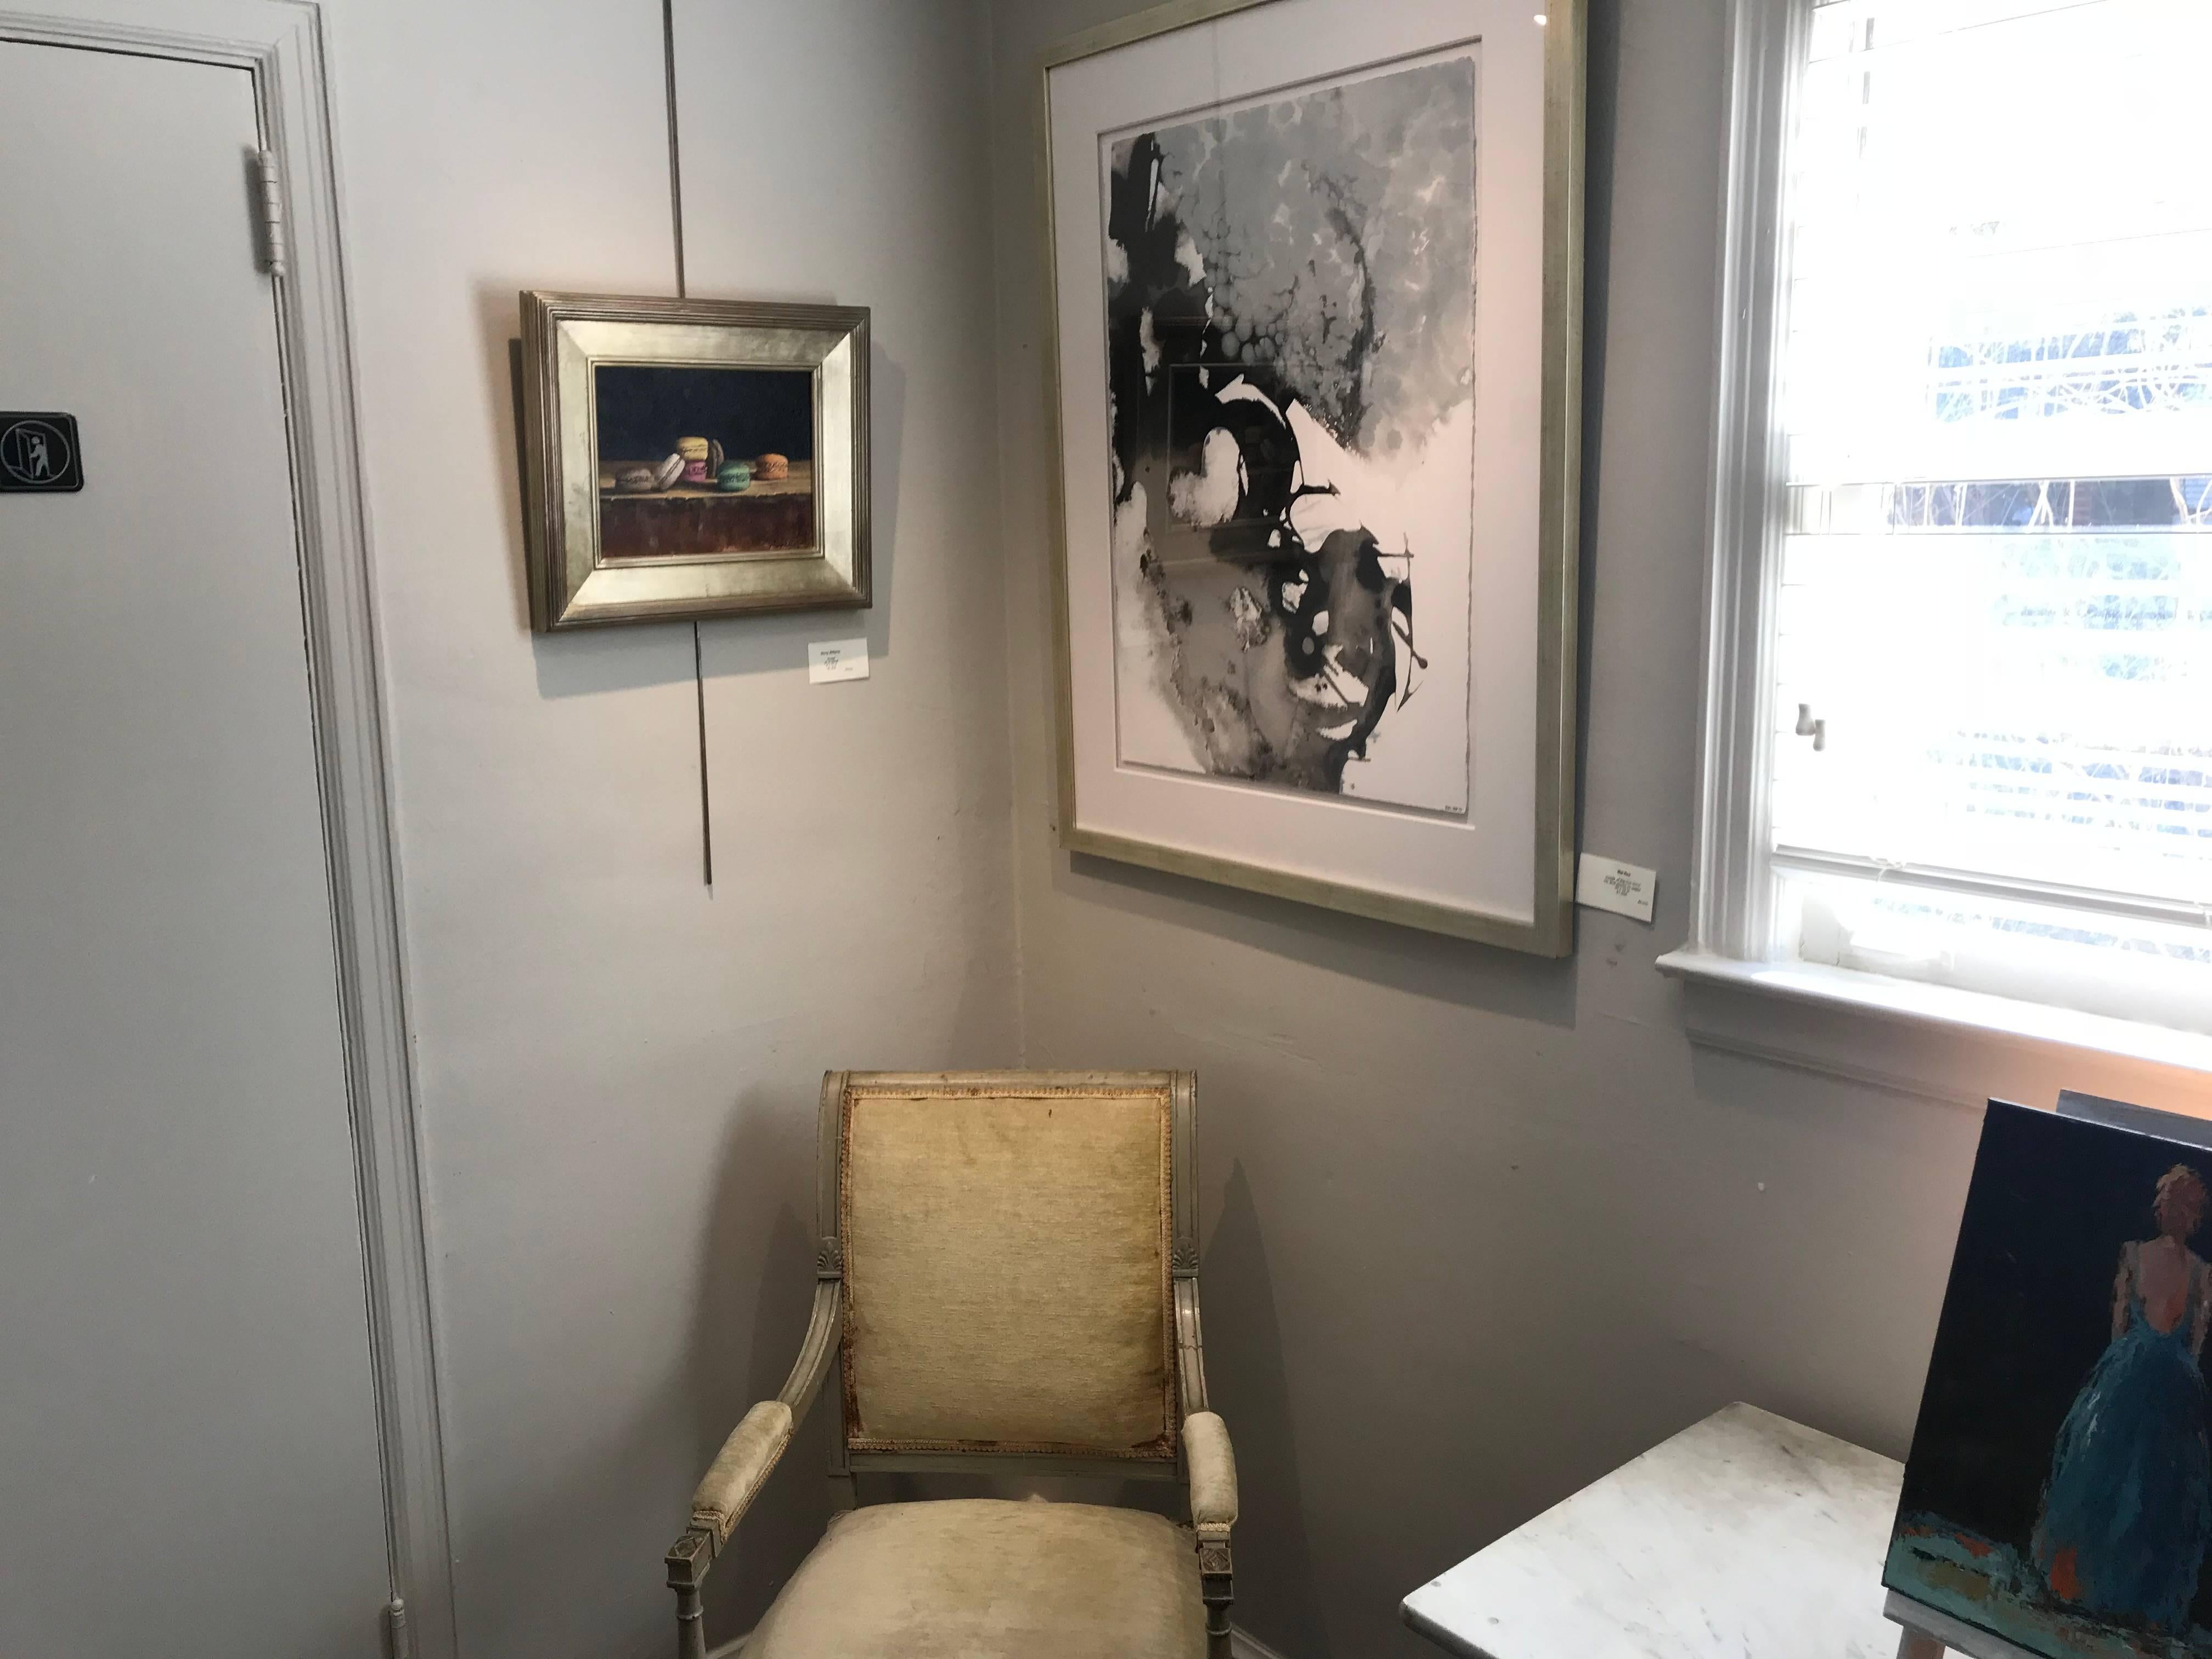 We had the privilege of meeting Ginny Williams at an international art exhibit in Boston, where her striking representational paintings were getting a lot of attention.  We were immediately drawn to the thoughtfully painted work, the clever titles